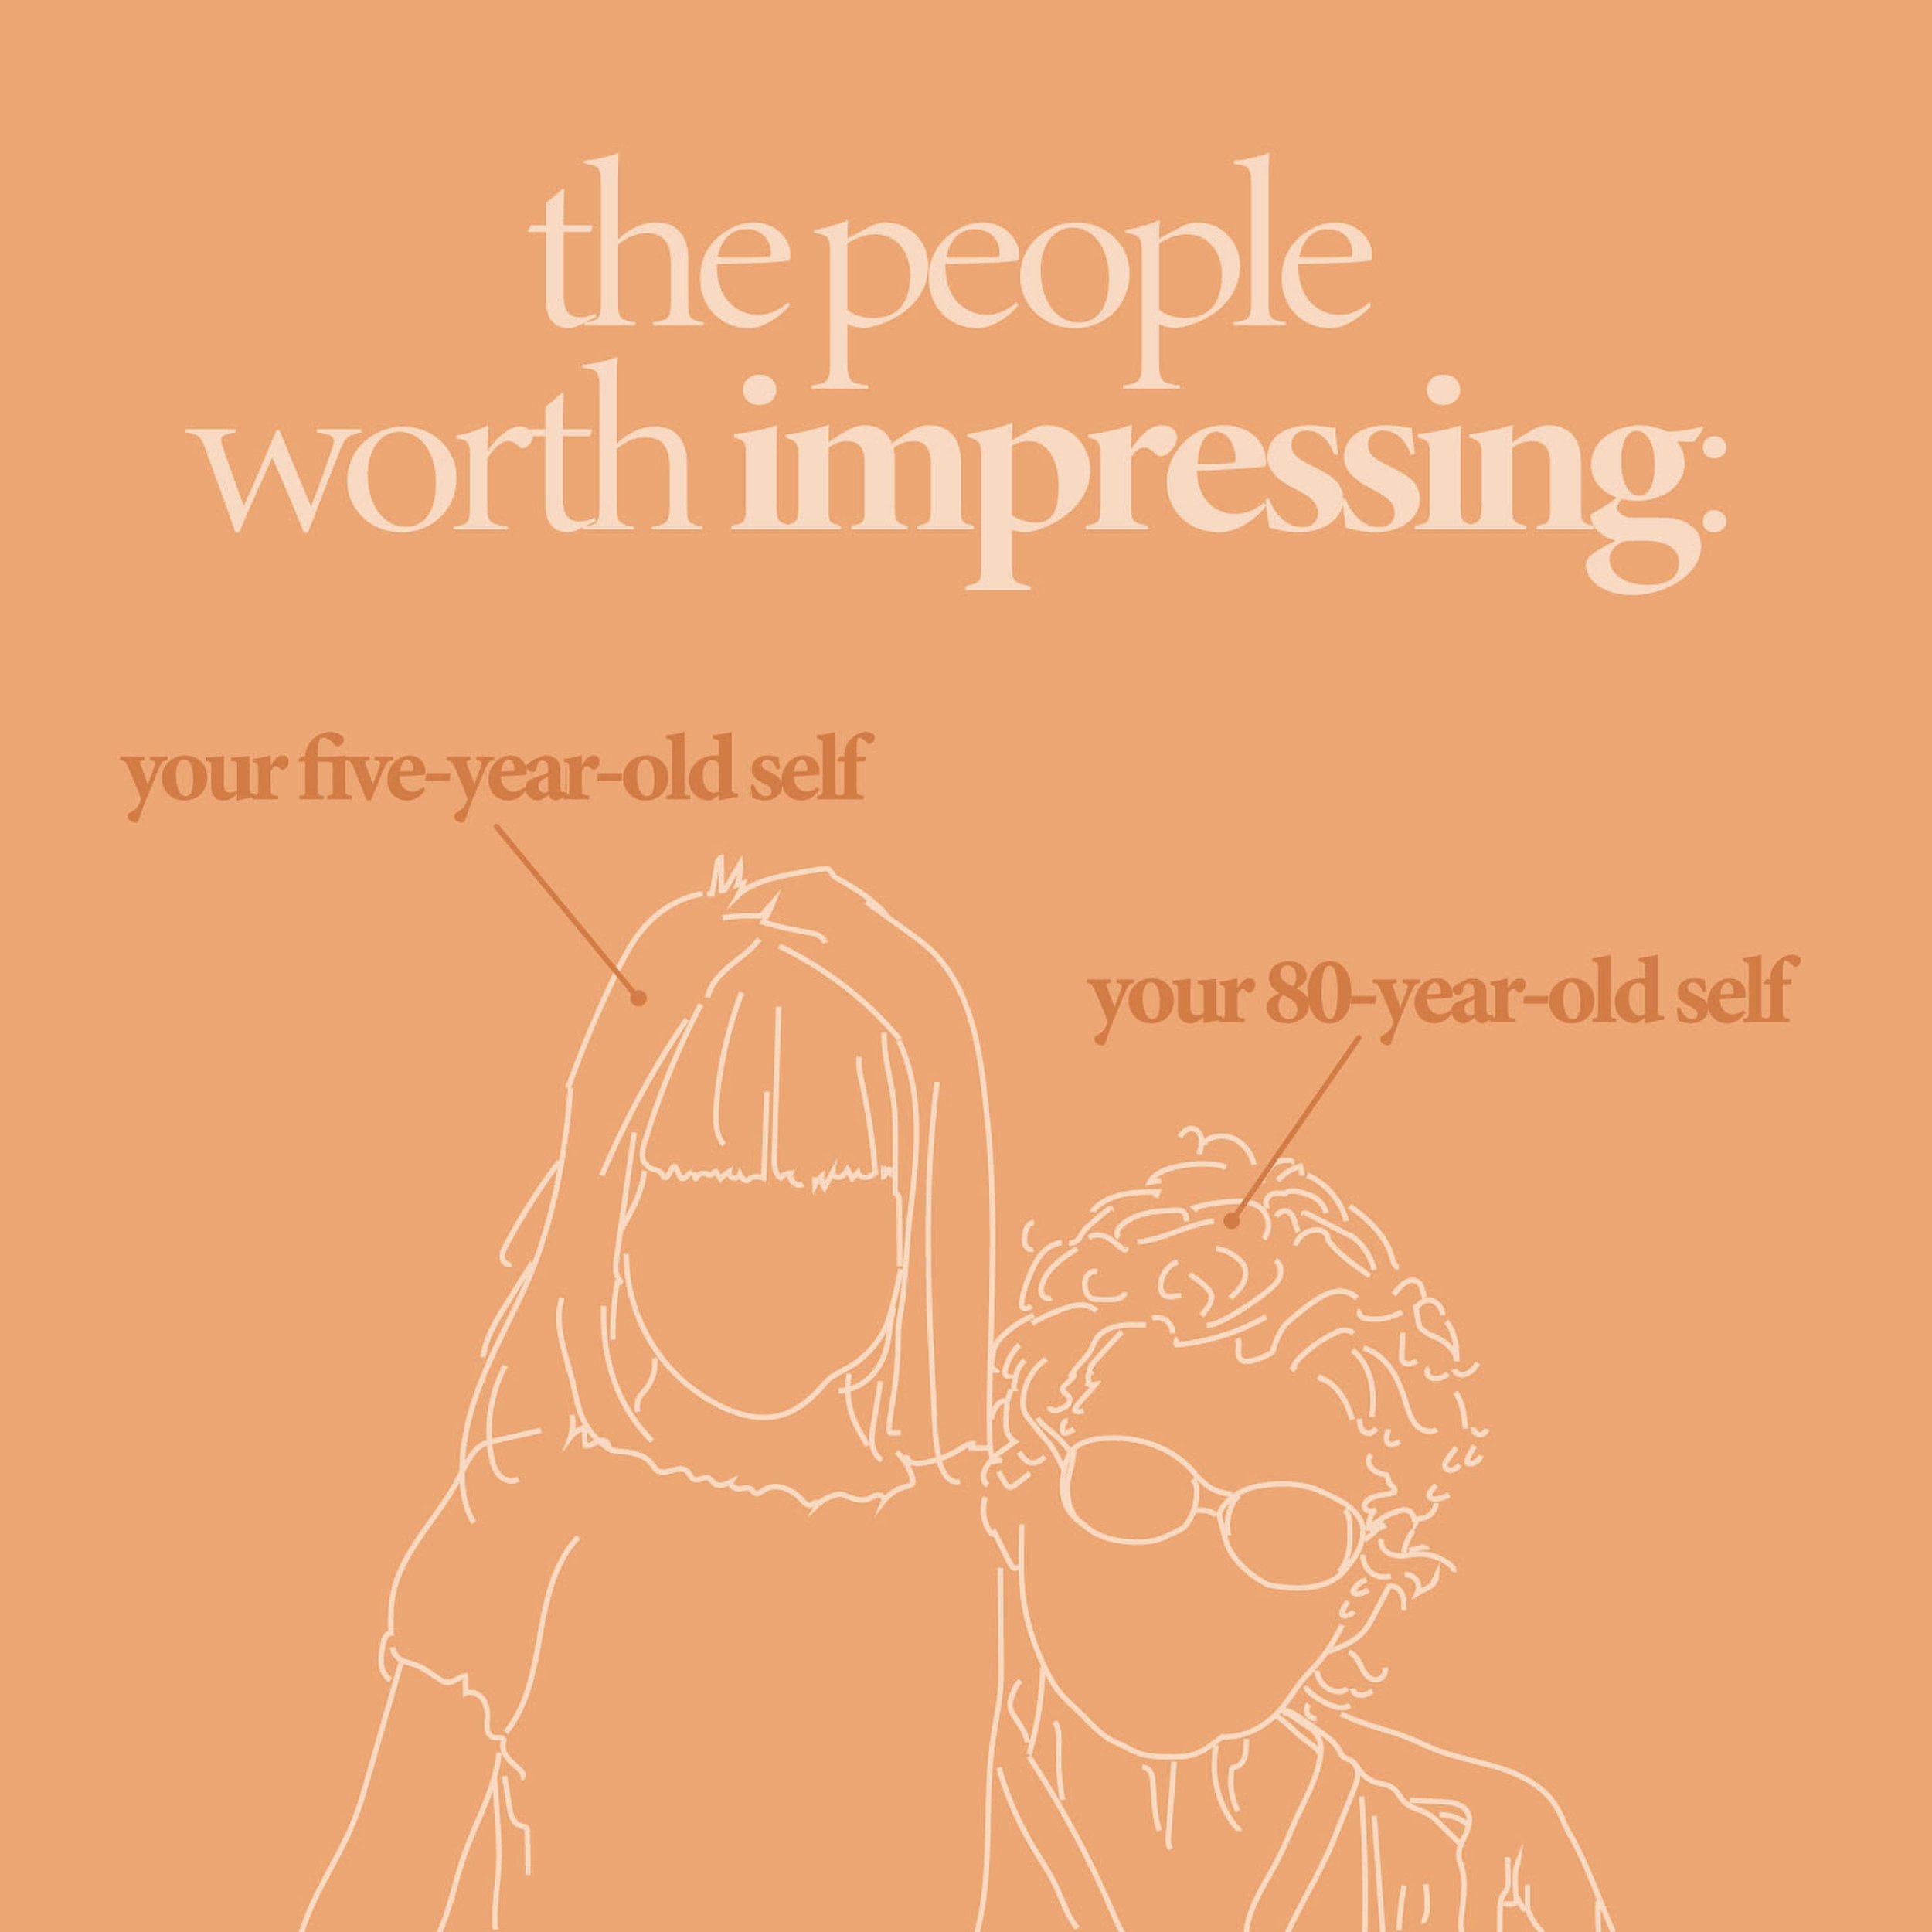 Remember that the only person worth impressing is yourself. Live a life that would make both your younger and future self proud. 

Content: @htwomey 
Design: @kylerluna